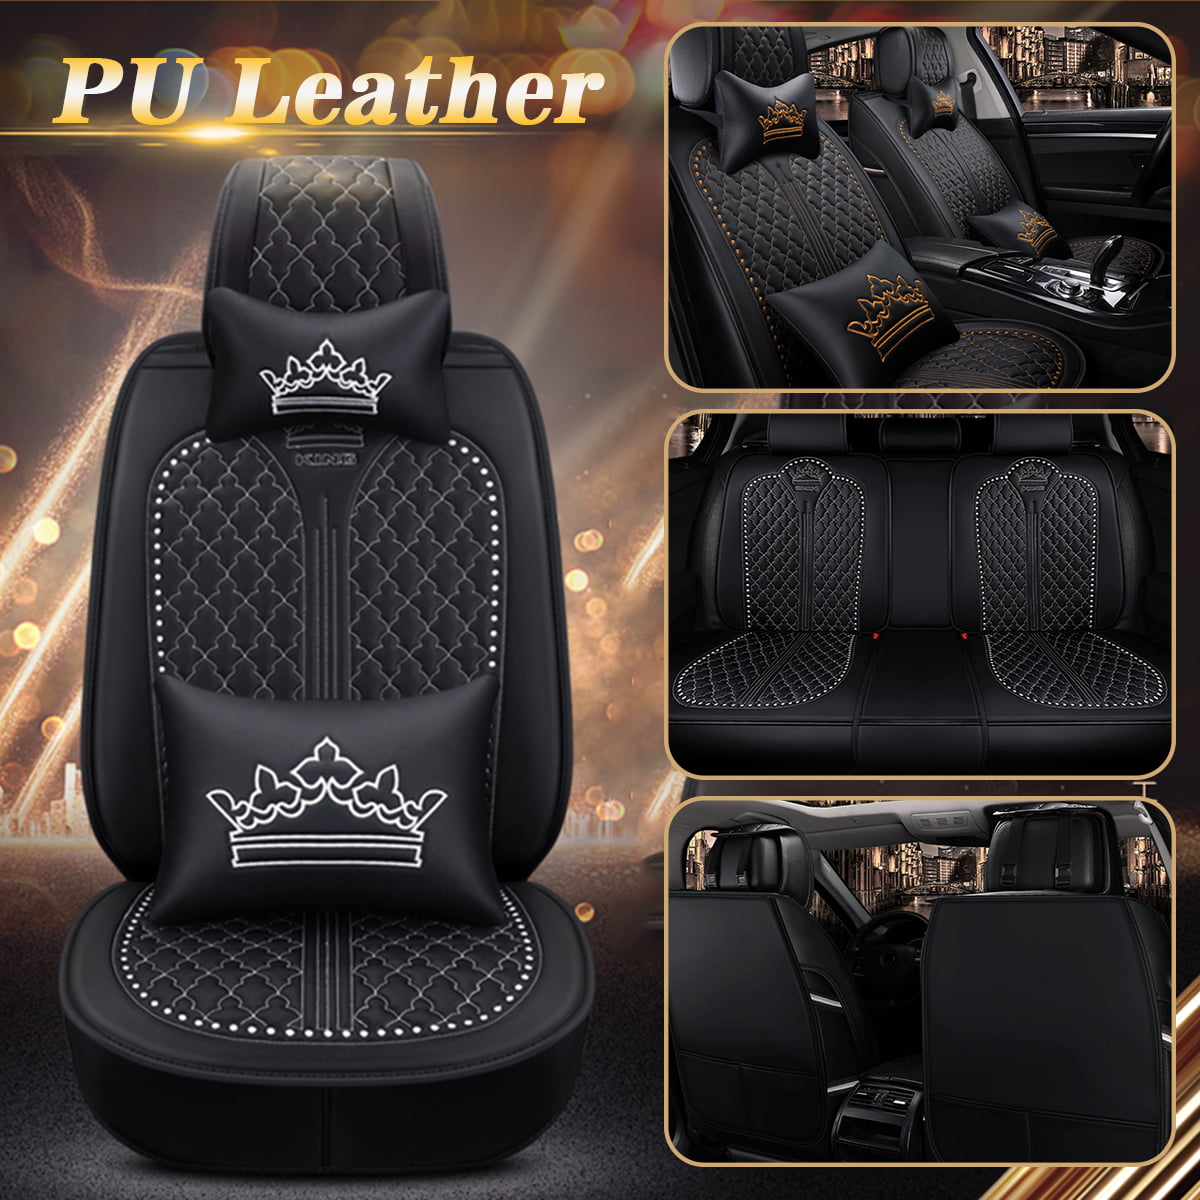 labwork PU Leather Car Seat Cover Protector for Front Seat Bottom,PU Leather Front Seat Cover Half/Full Surround Chair Cushion Mat Pad Replacement for 90% Vehicles Sedan SUV Truck Mini Van 